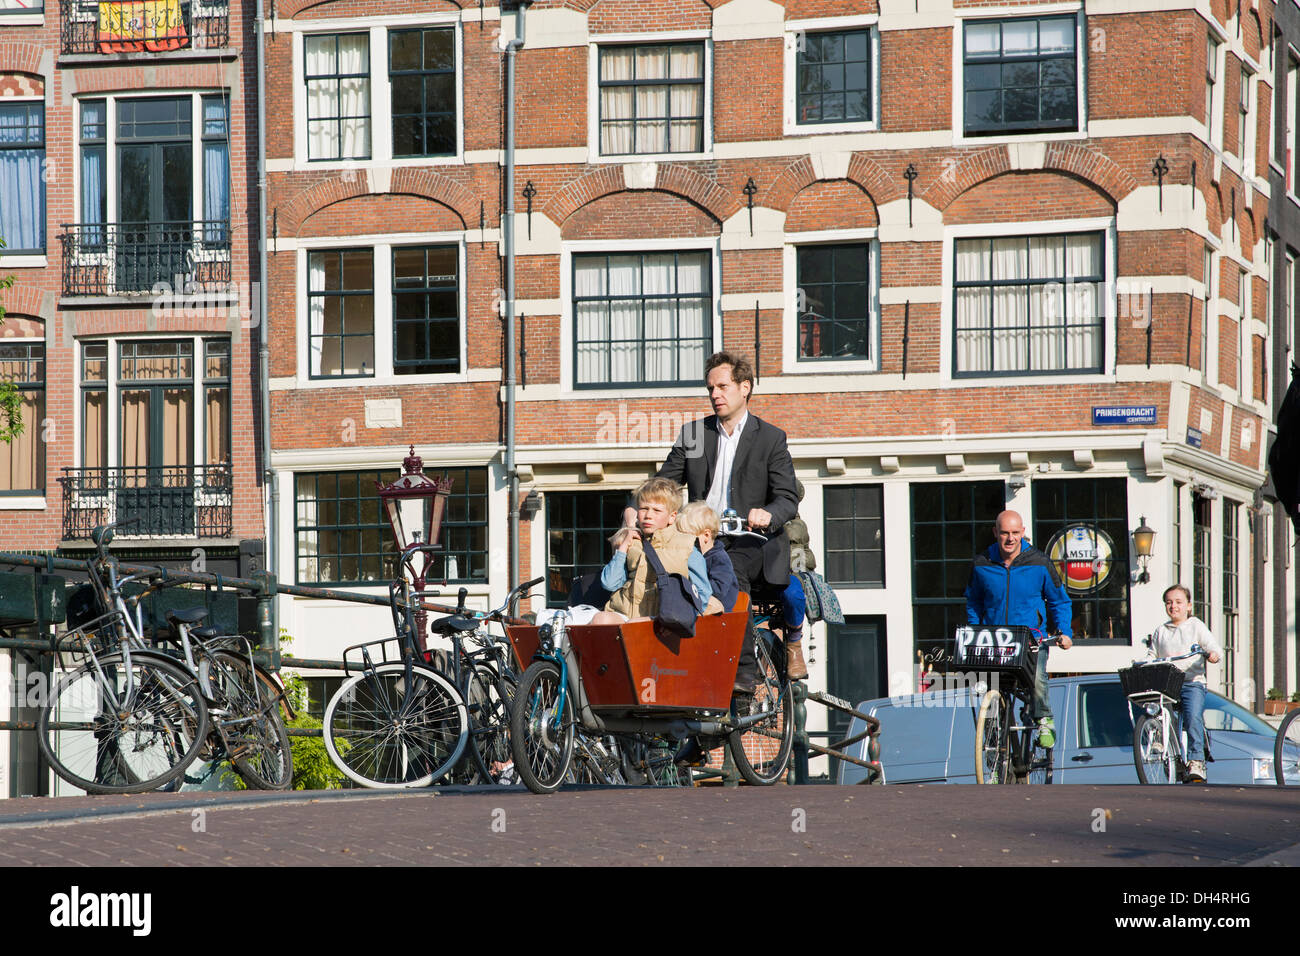 Netherlands, Amsterdam, 17th century houses, canal Brouwersgracht. Cyclists. Father brings children to school on his bike. Stock Photo